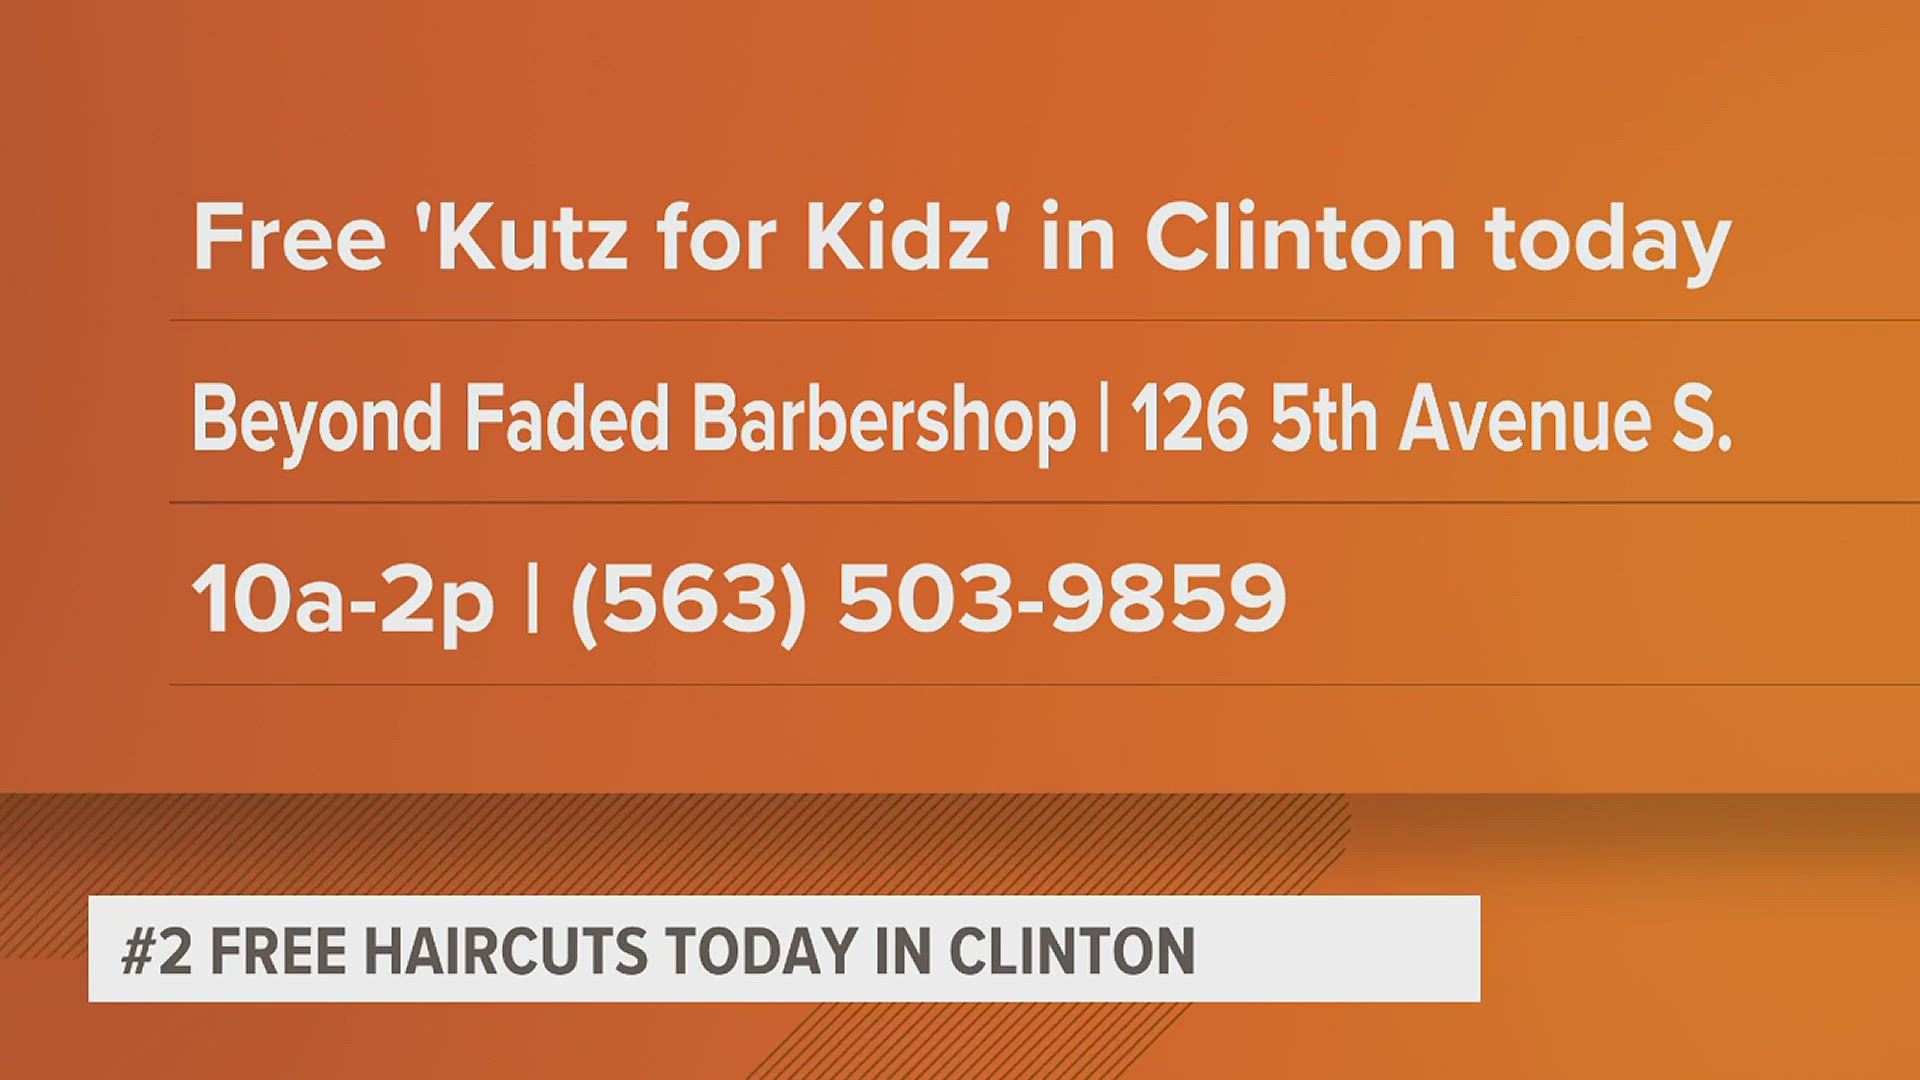 The Beyond Faded Barbershop in Clinton, Iowa is allowing area students free haircuts before heading back to the classroom.